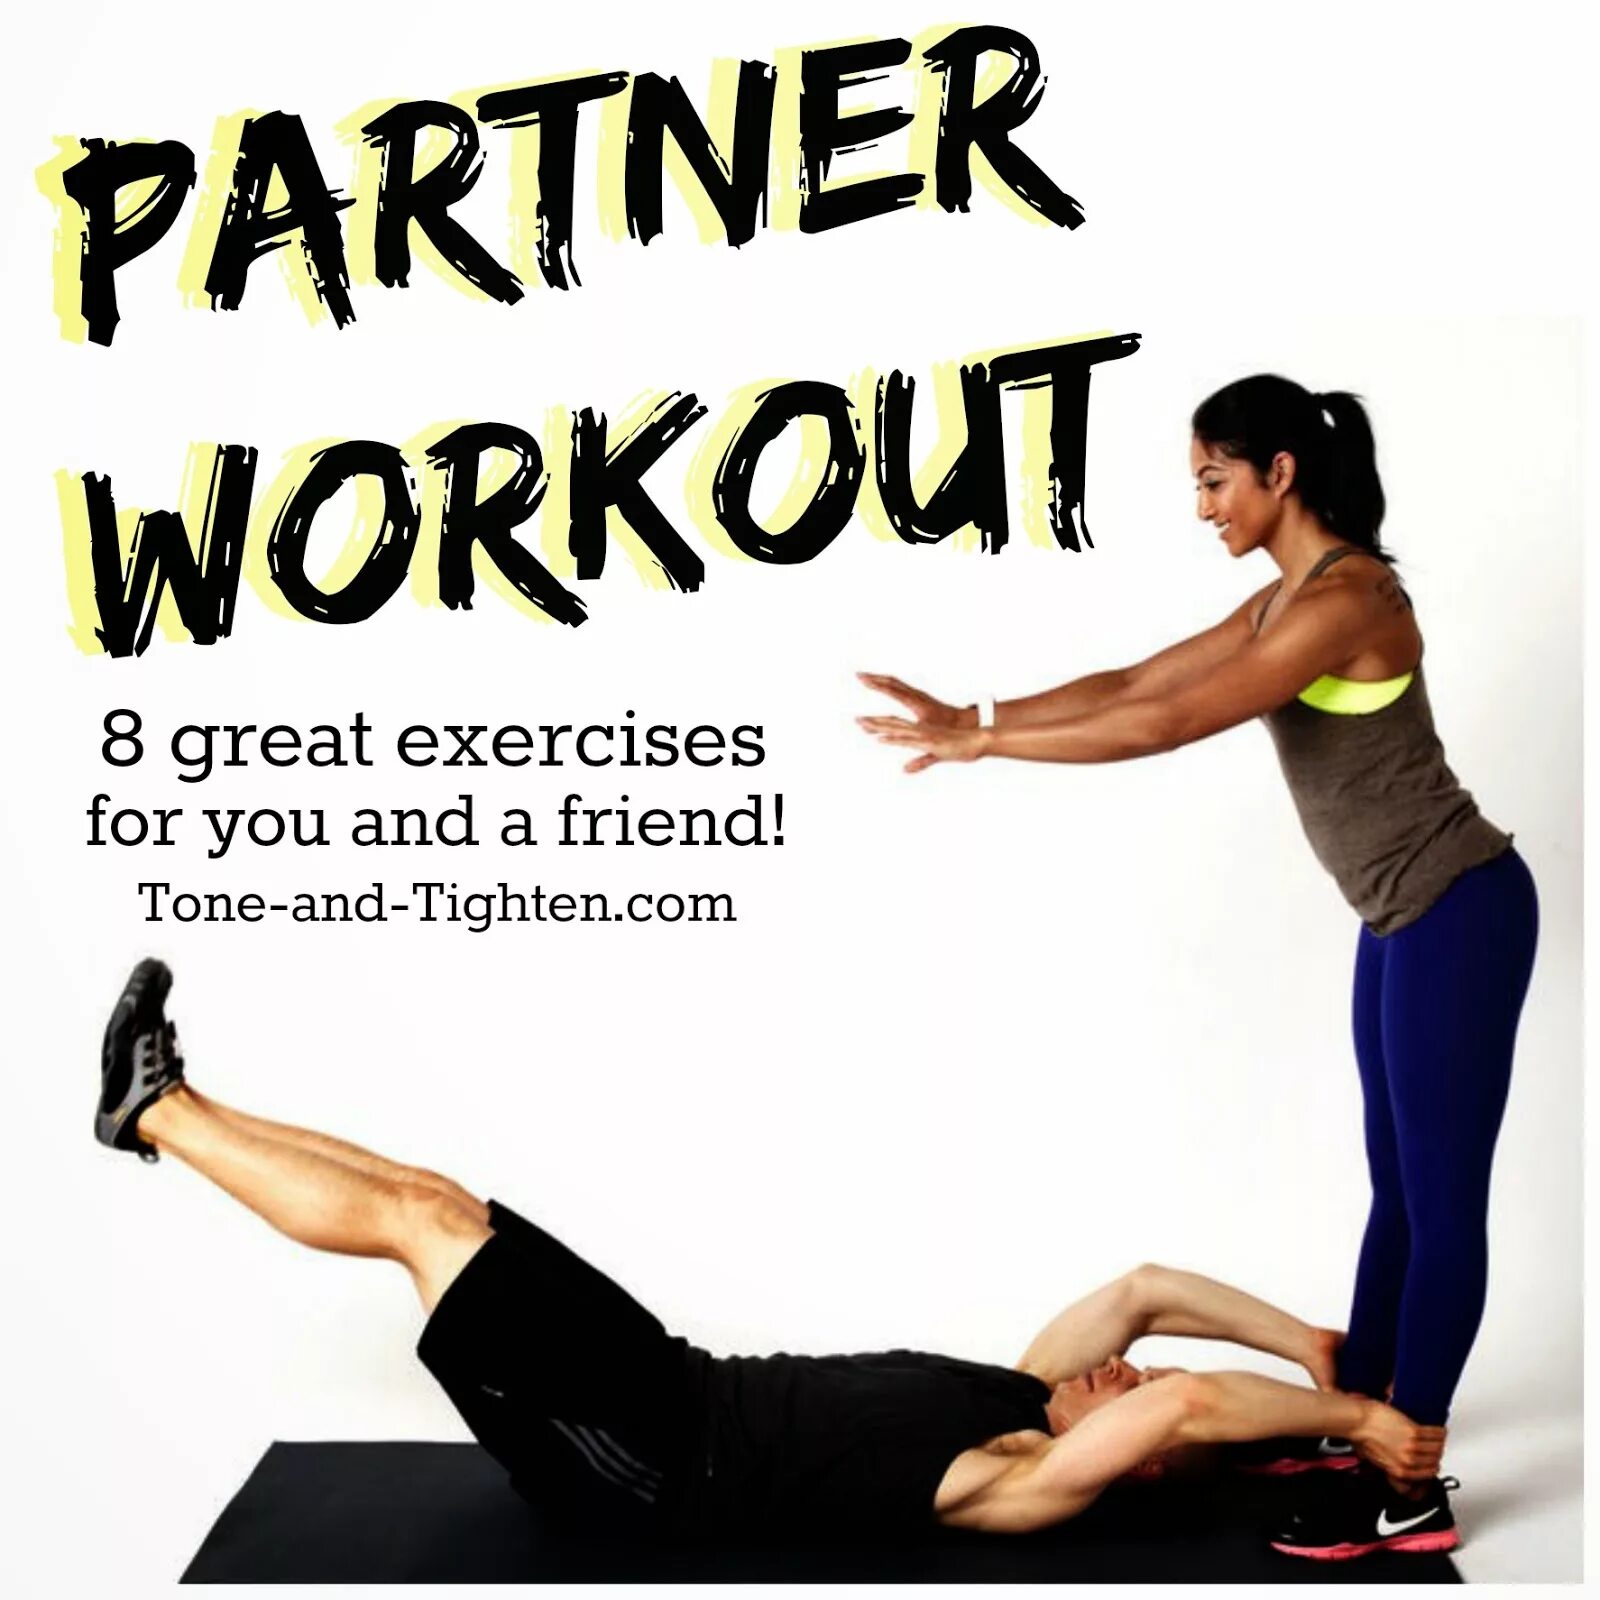 Workout exercises. Workout friends. Friends exercise. Workout partners – xpray. Exercise is great